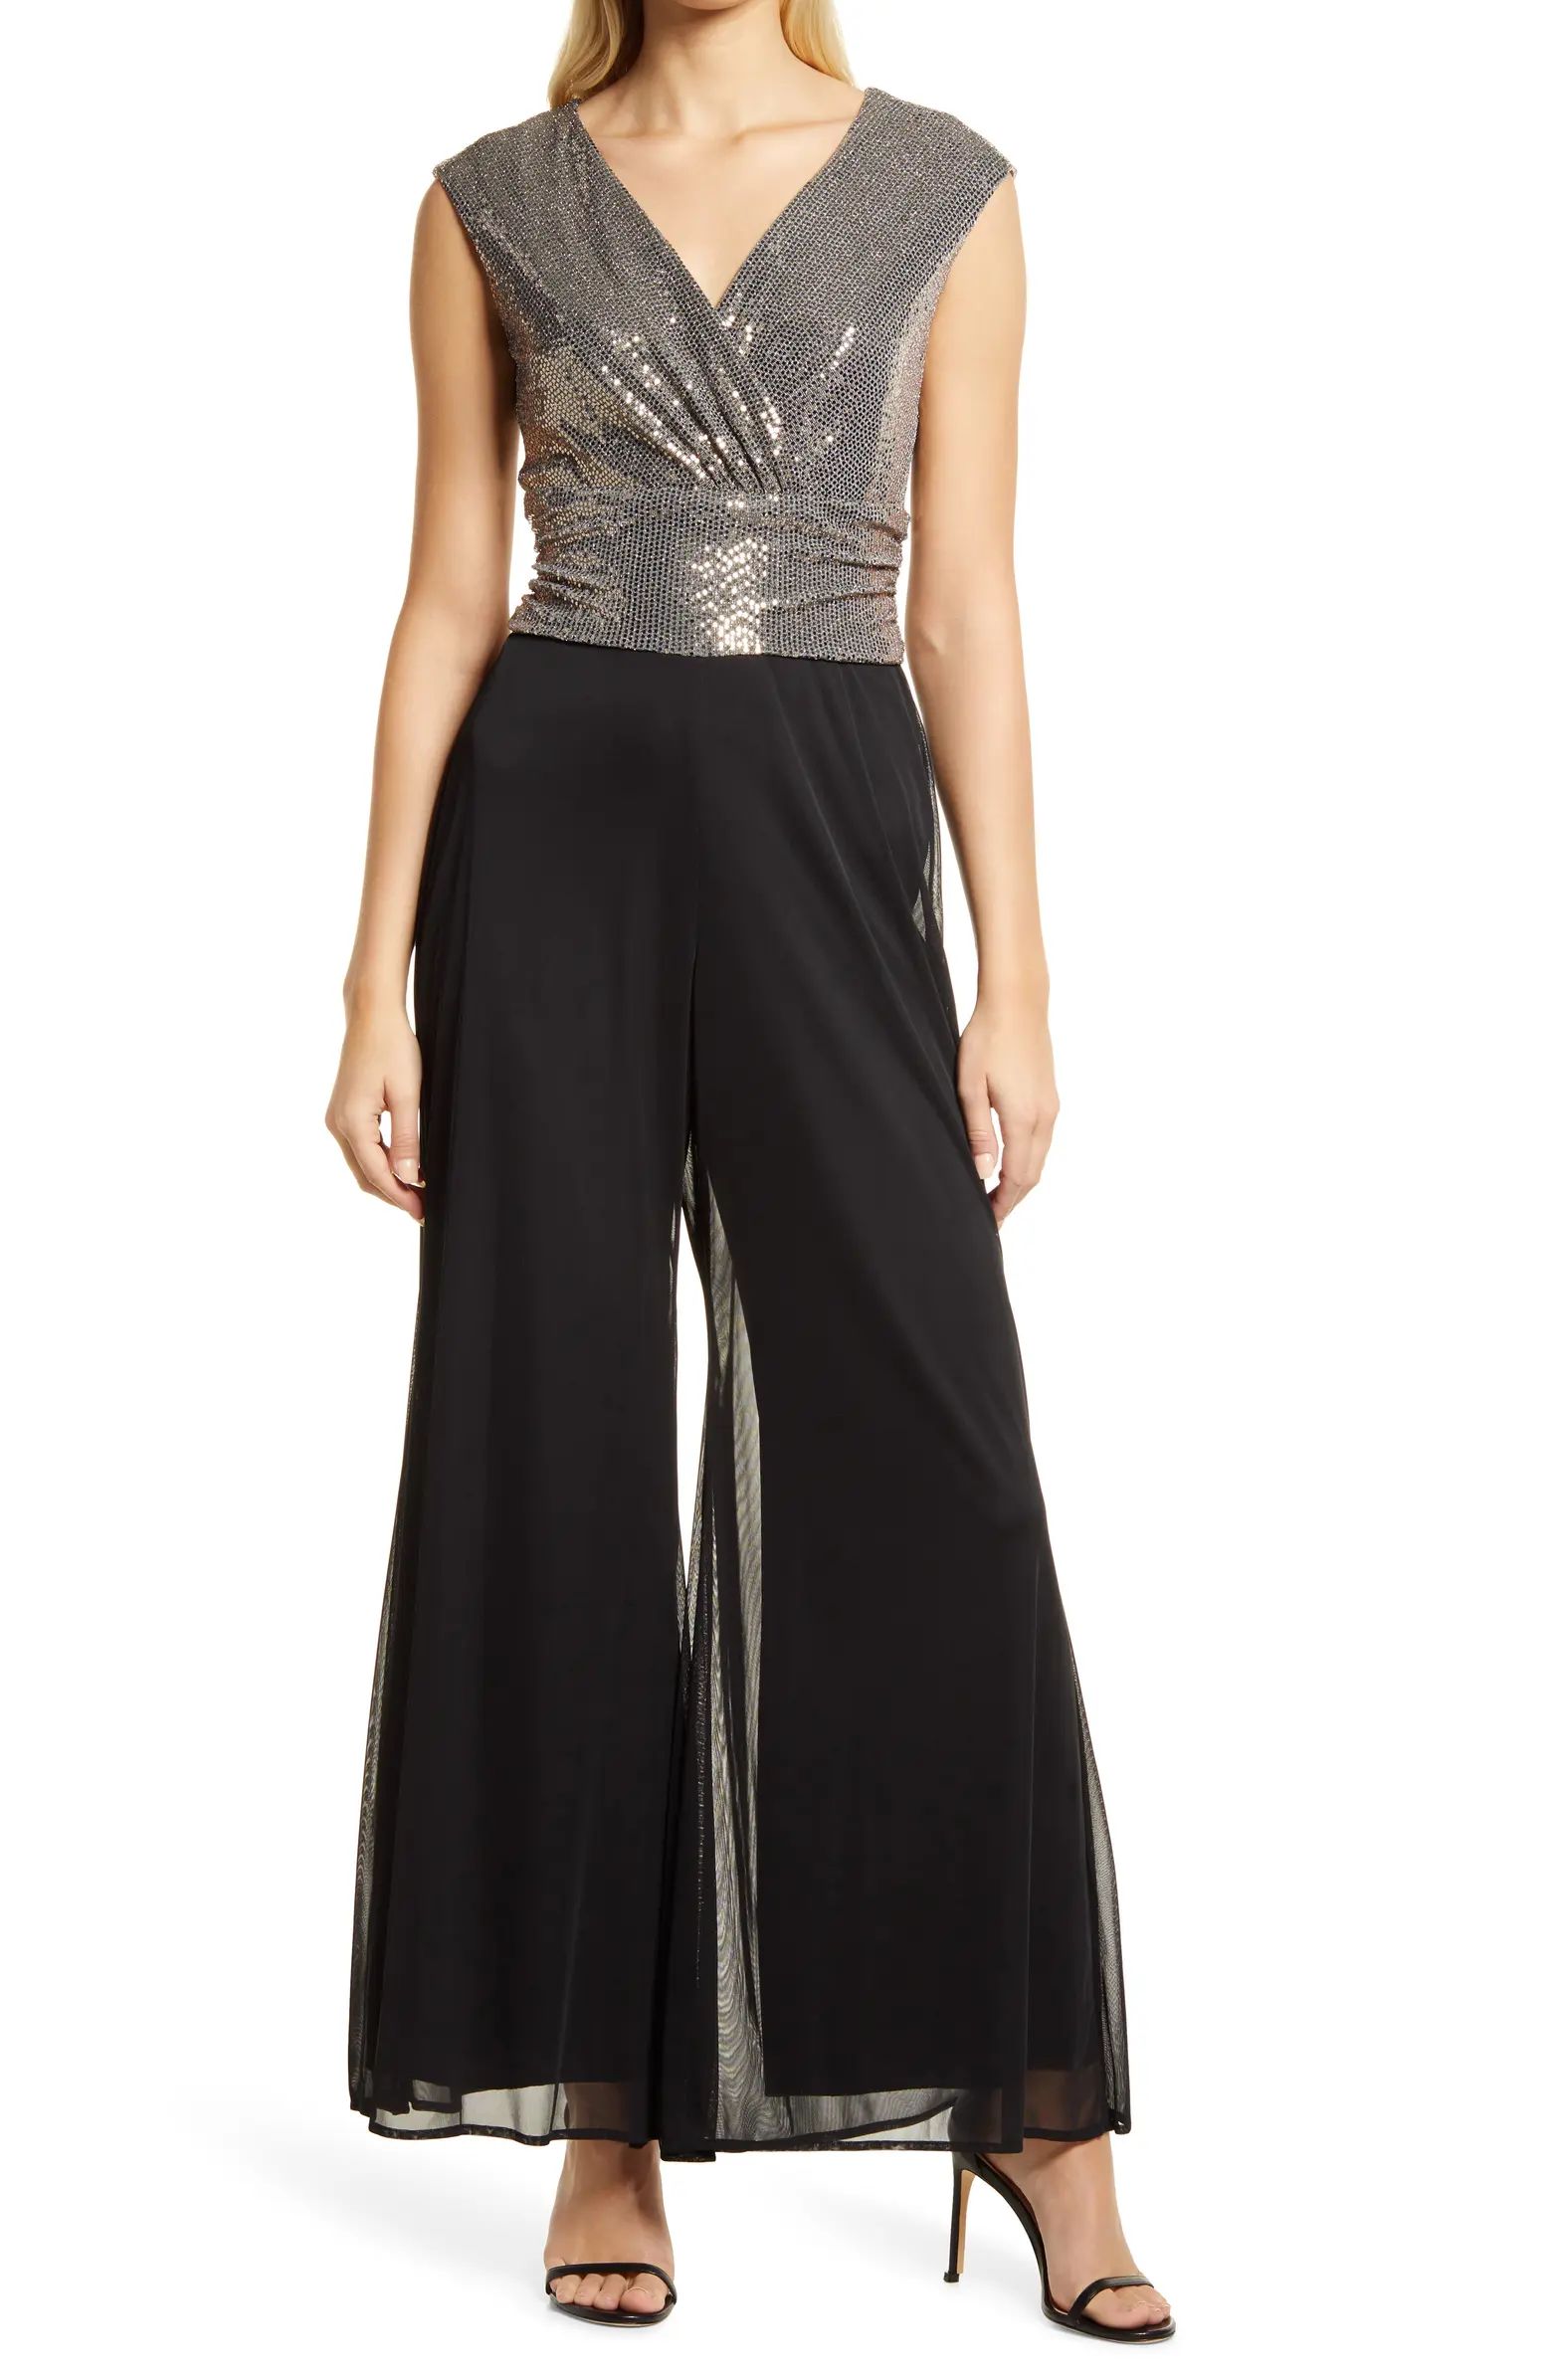 CAxLZ by Connected Apparel Jennifer Sequin & Chiffon Jumpsuit | Nordstrom | Nordstrom